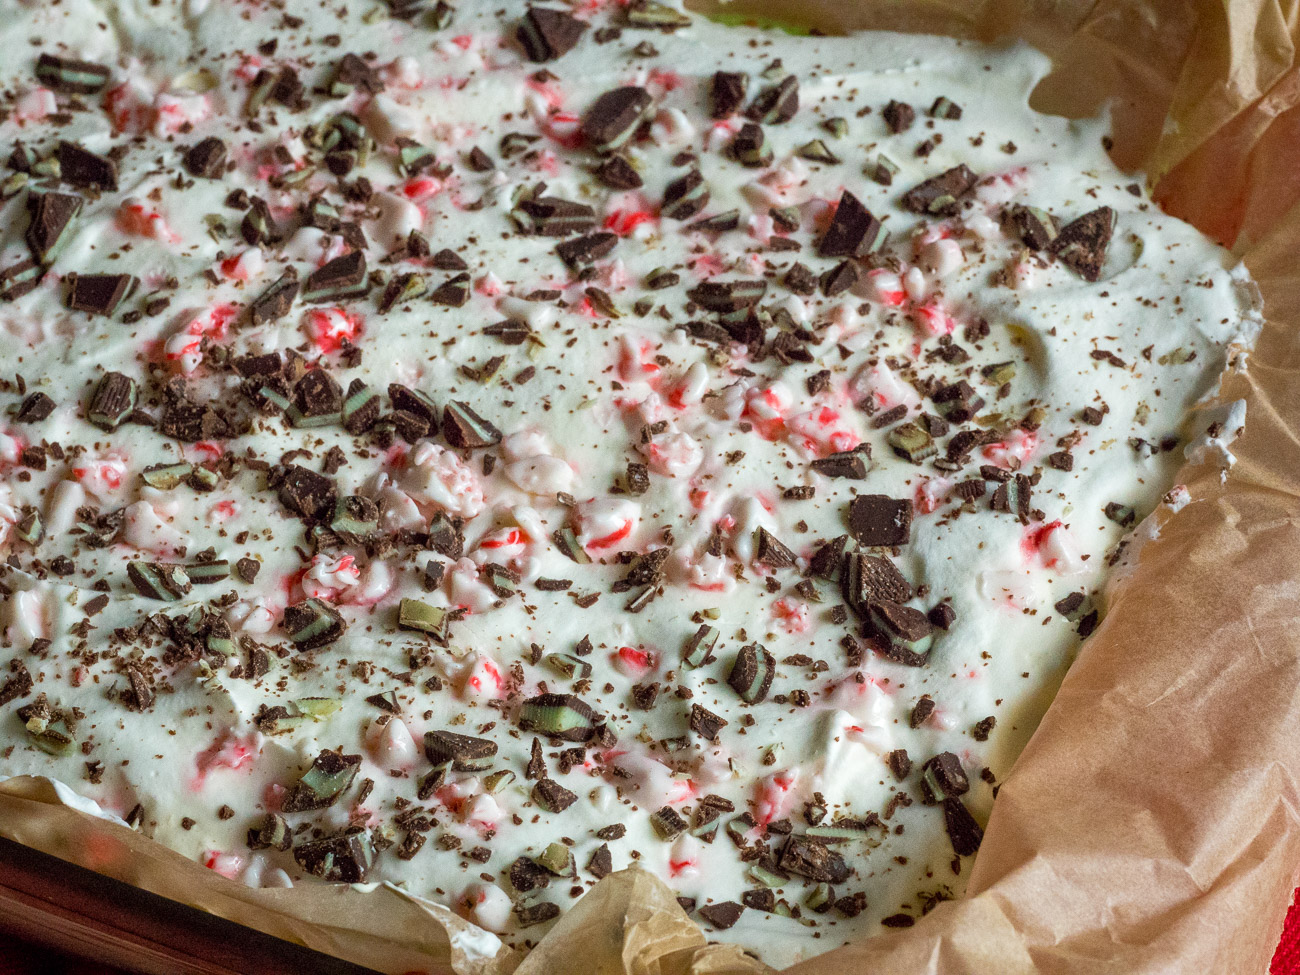 Spread cool whip over the green layer and sprinkle remaining crushed peppermints and mint chocolate chips on top. Store in the fridge until ready to eat.